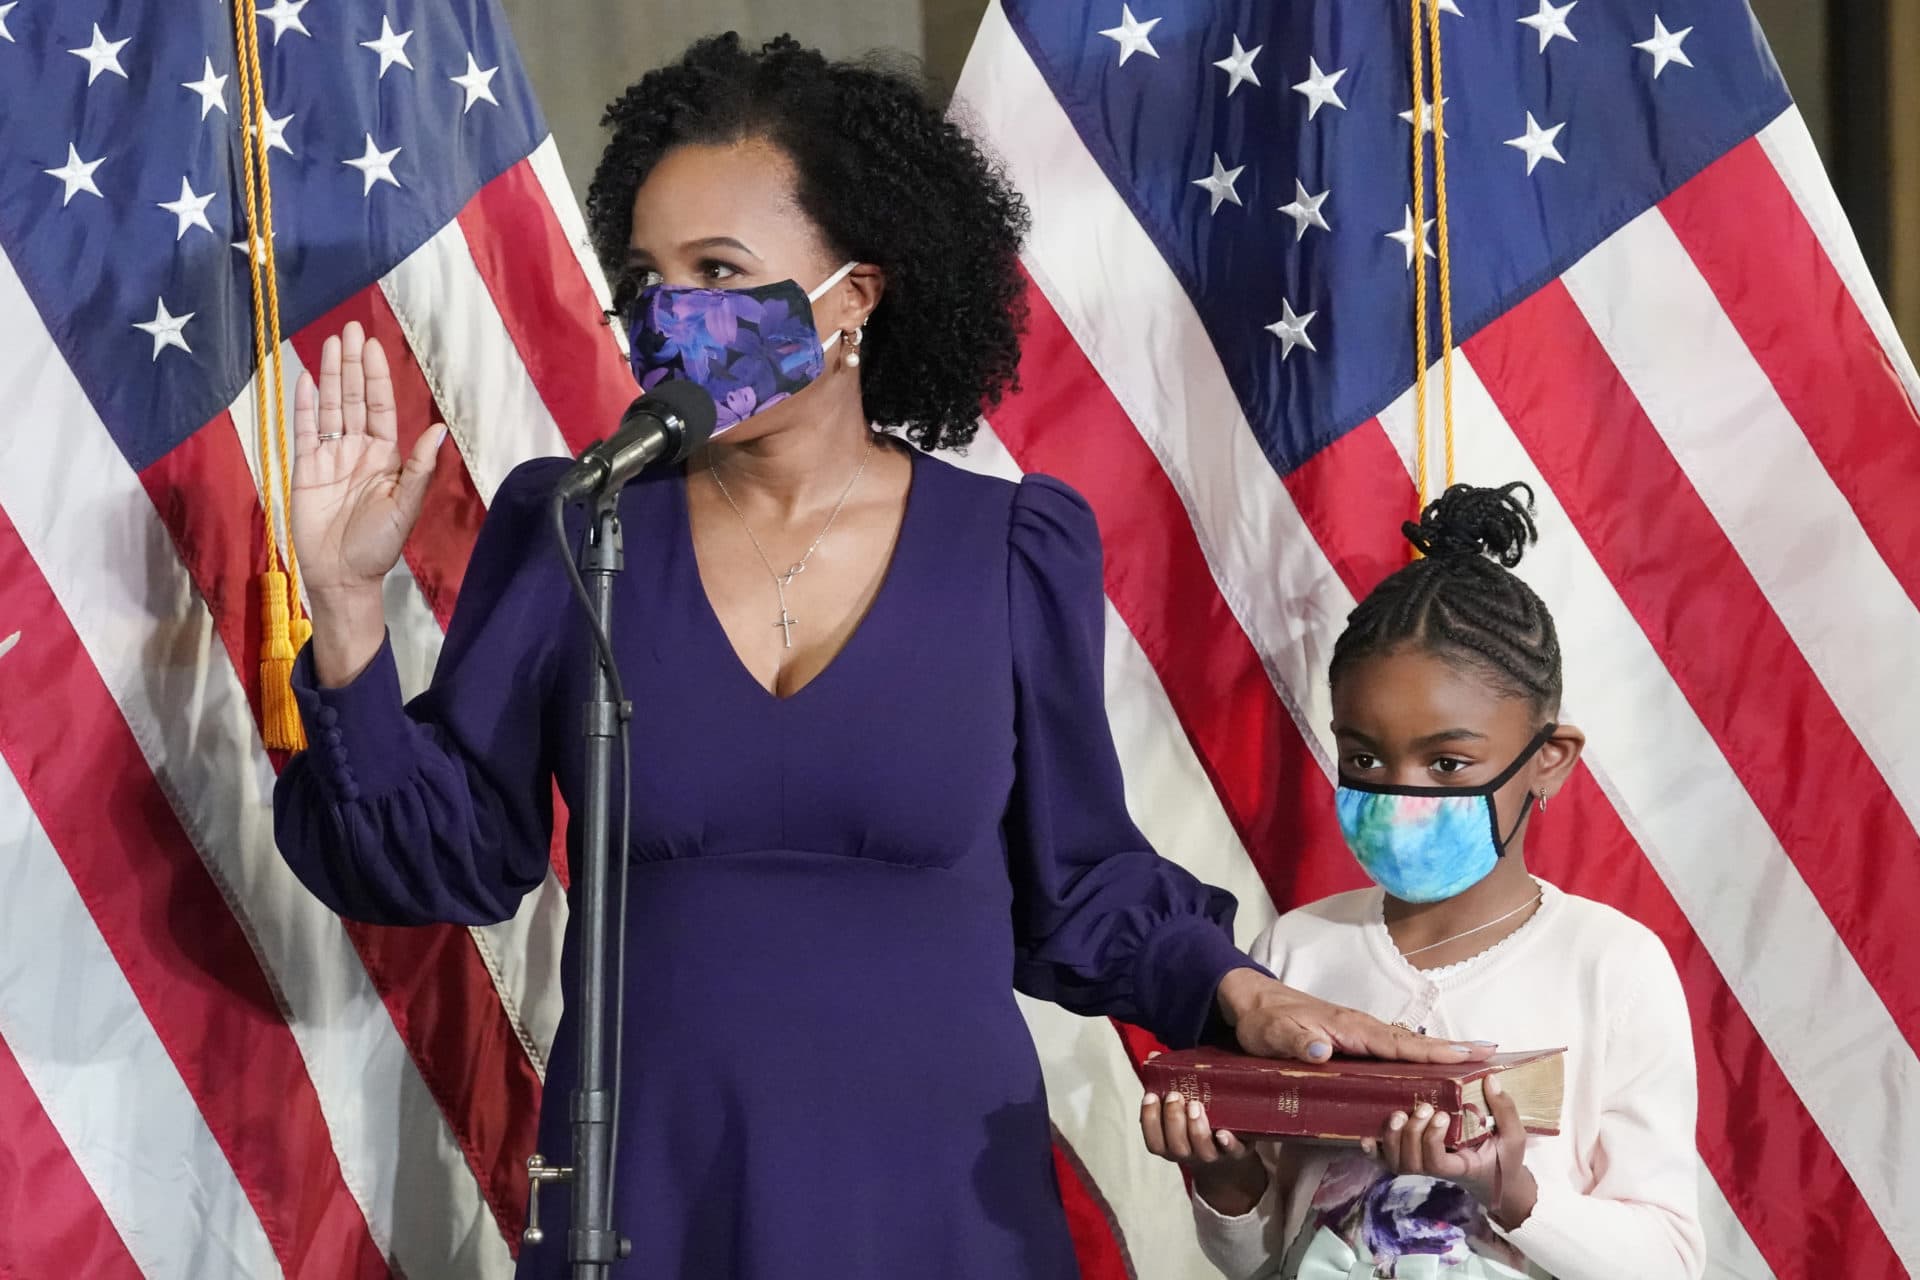 Former Boston City Council President Kim Janey, 55, is sworn in as Boston's new mayor at City Hall while her granddaughter, Rosie, holds a Bible, Wednesday, March 24, 2021, in Boston.(Elise Amendola/AP)